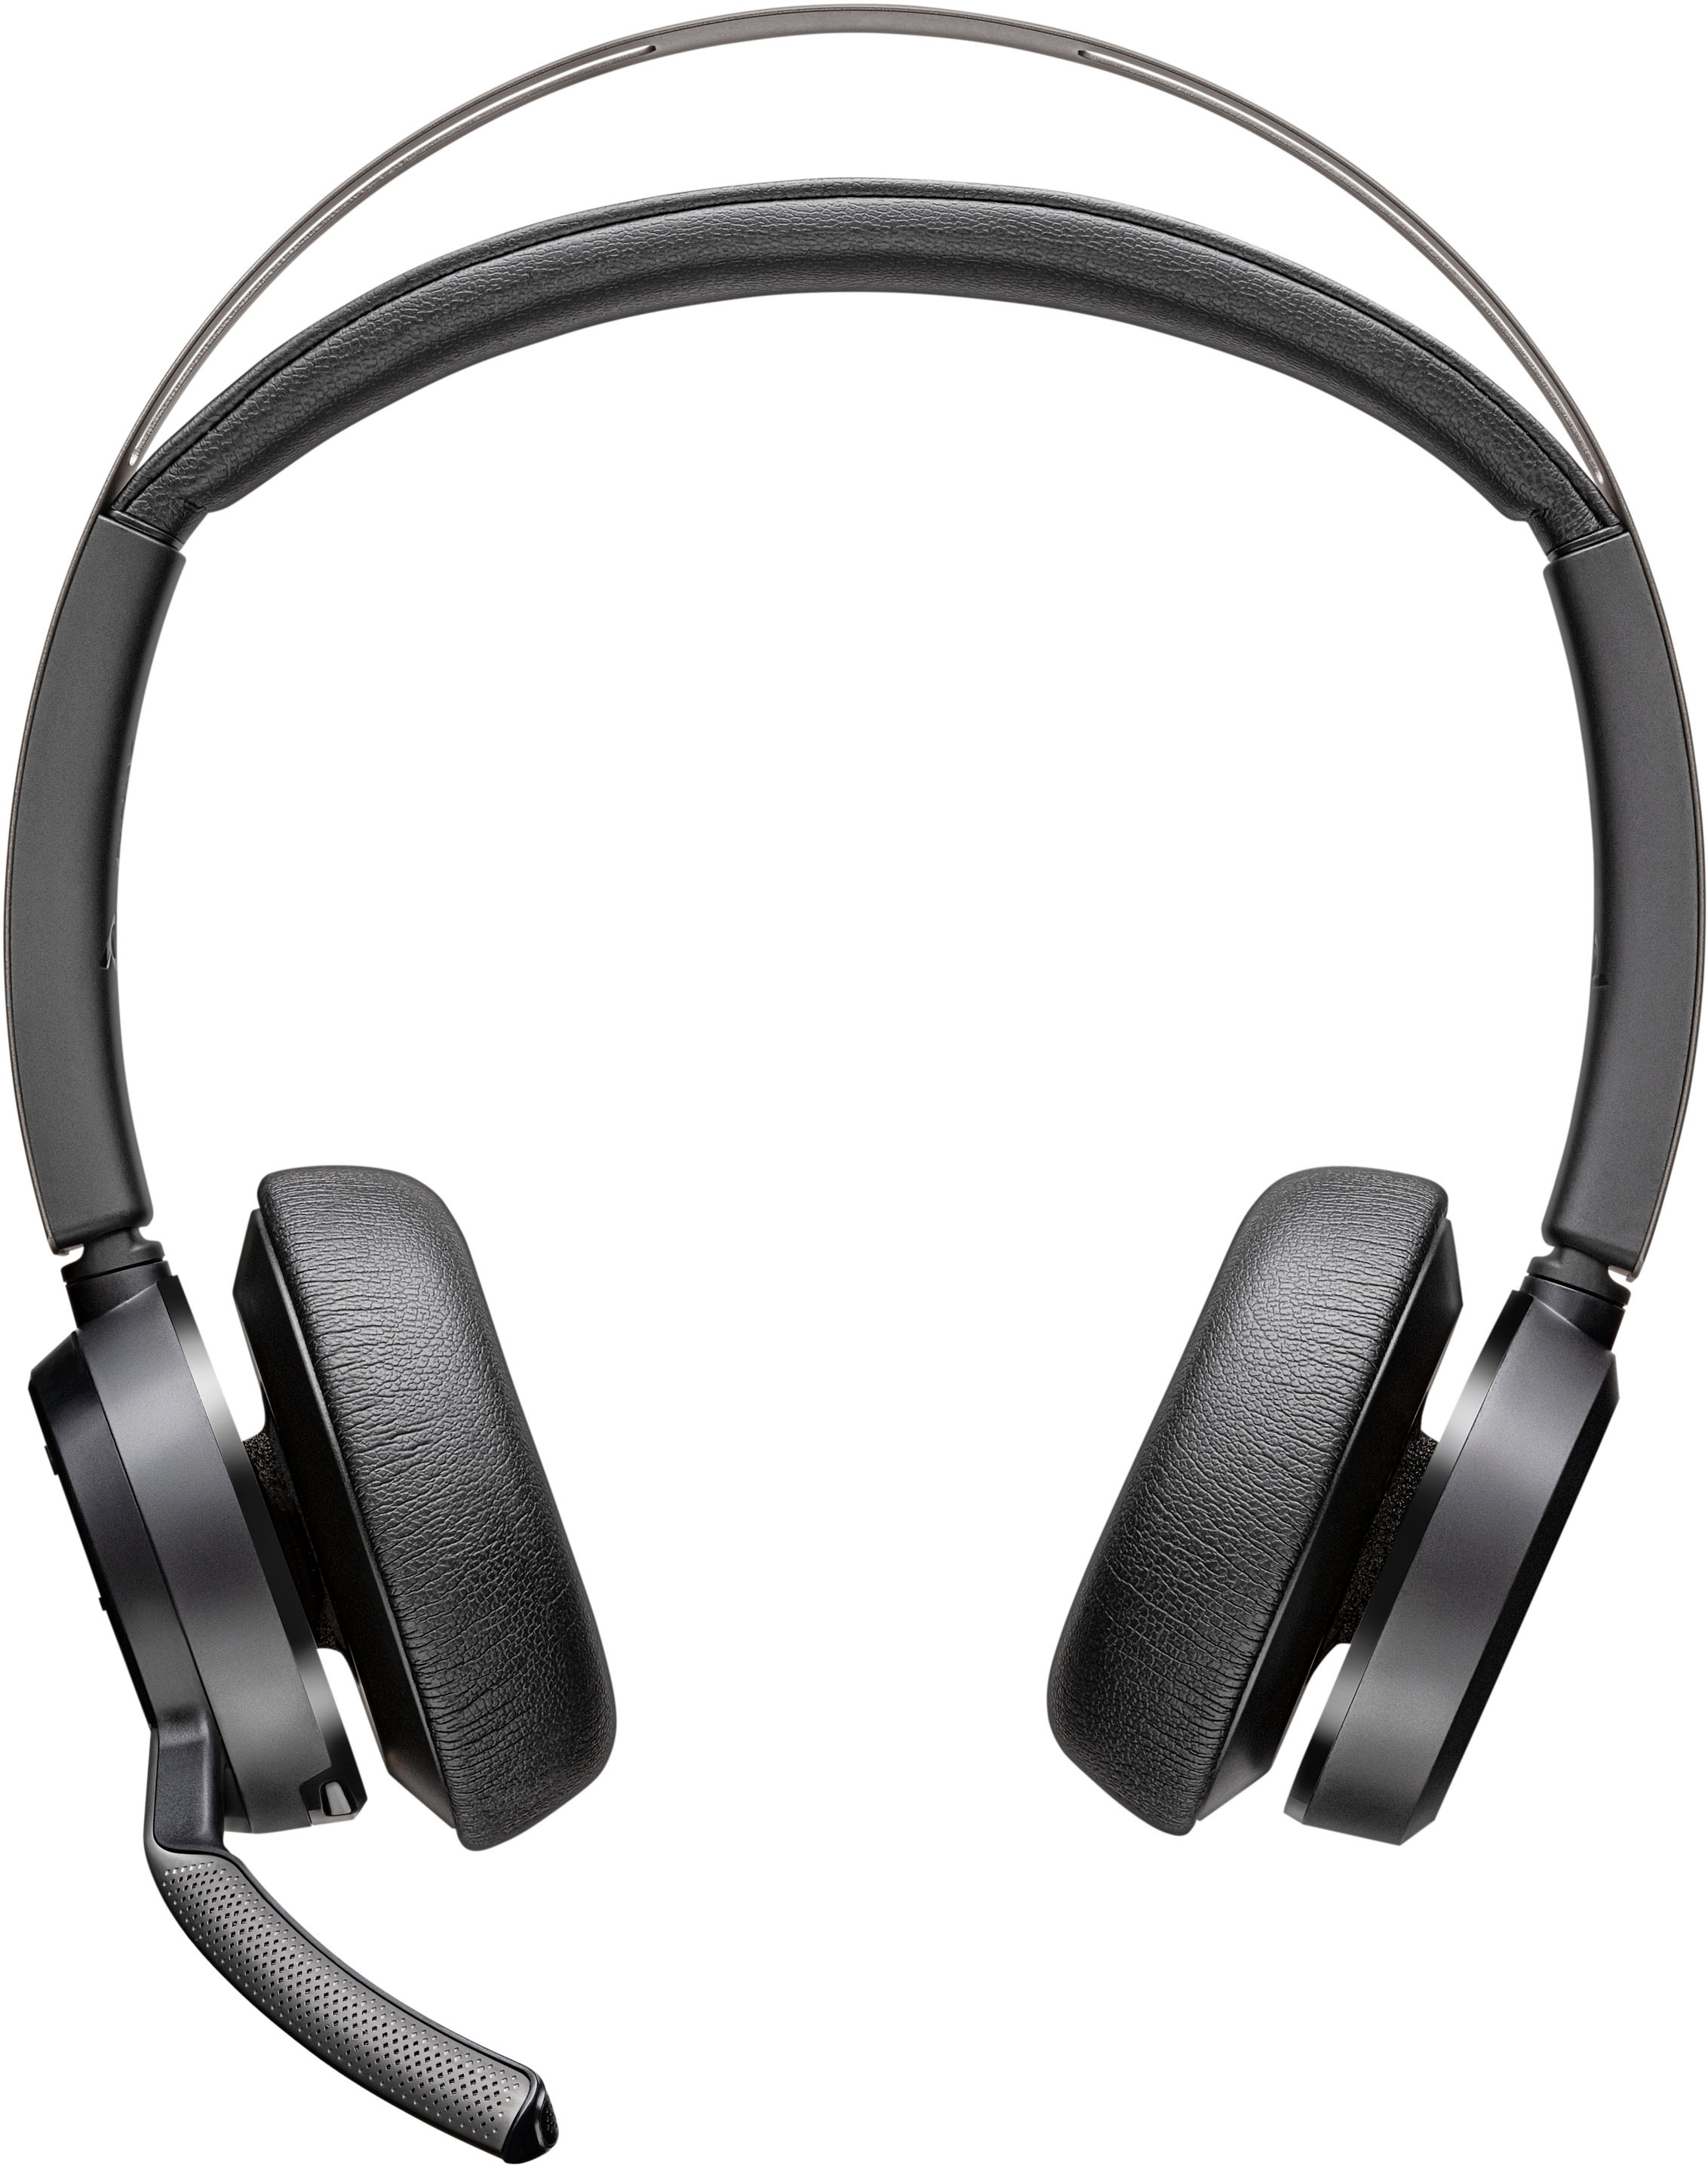 Angle View: Poly - formerly Plantronics - Voyager Focus 2 Wireless Noise Cancelling On-Ear Headset with Charge Stand - Black